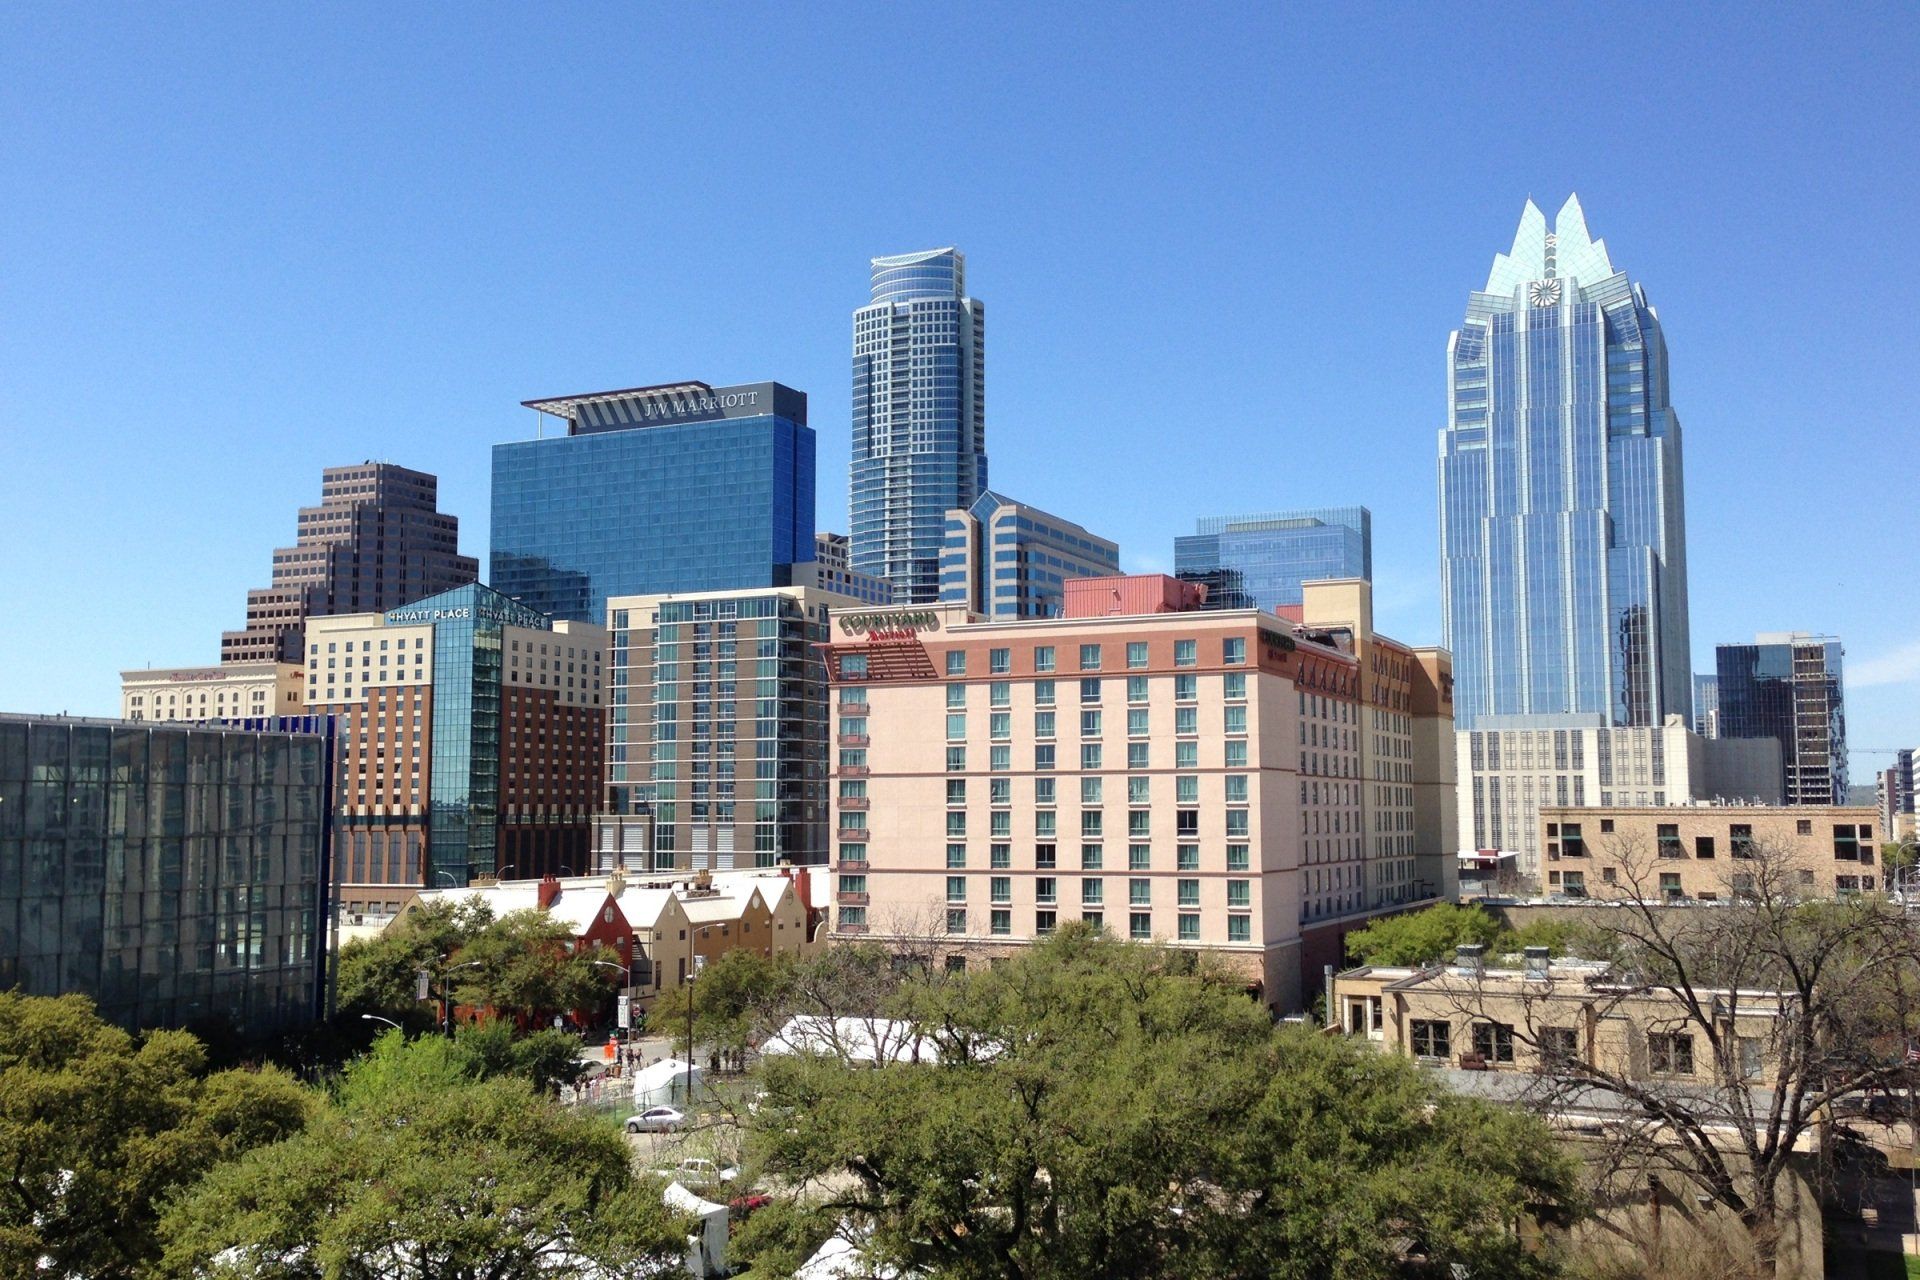 Read here to find out the average take-home pay for a real estate agent in Texas